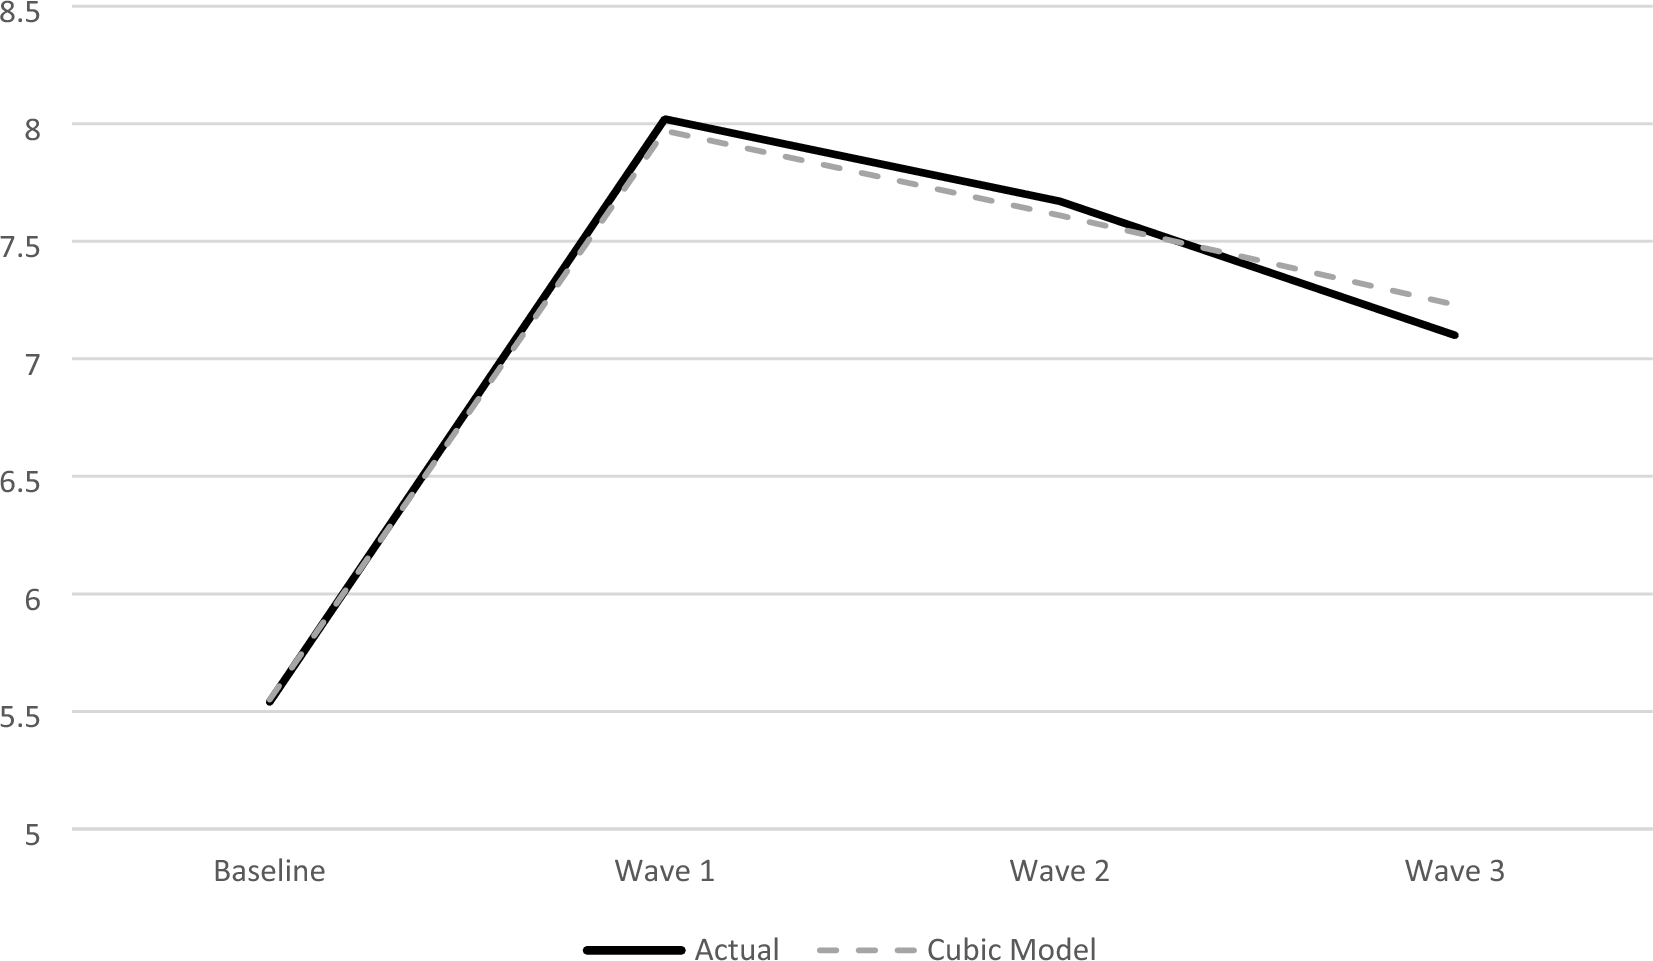 Trajectories and correlates of mental health among urban, school-age children during the COVID-19 pandemic: a longitudinal study